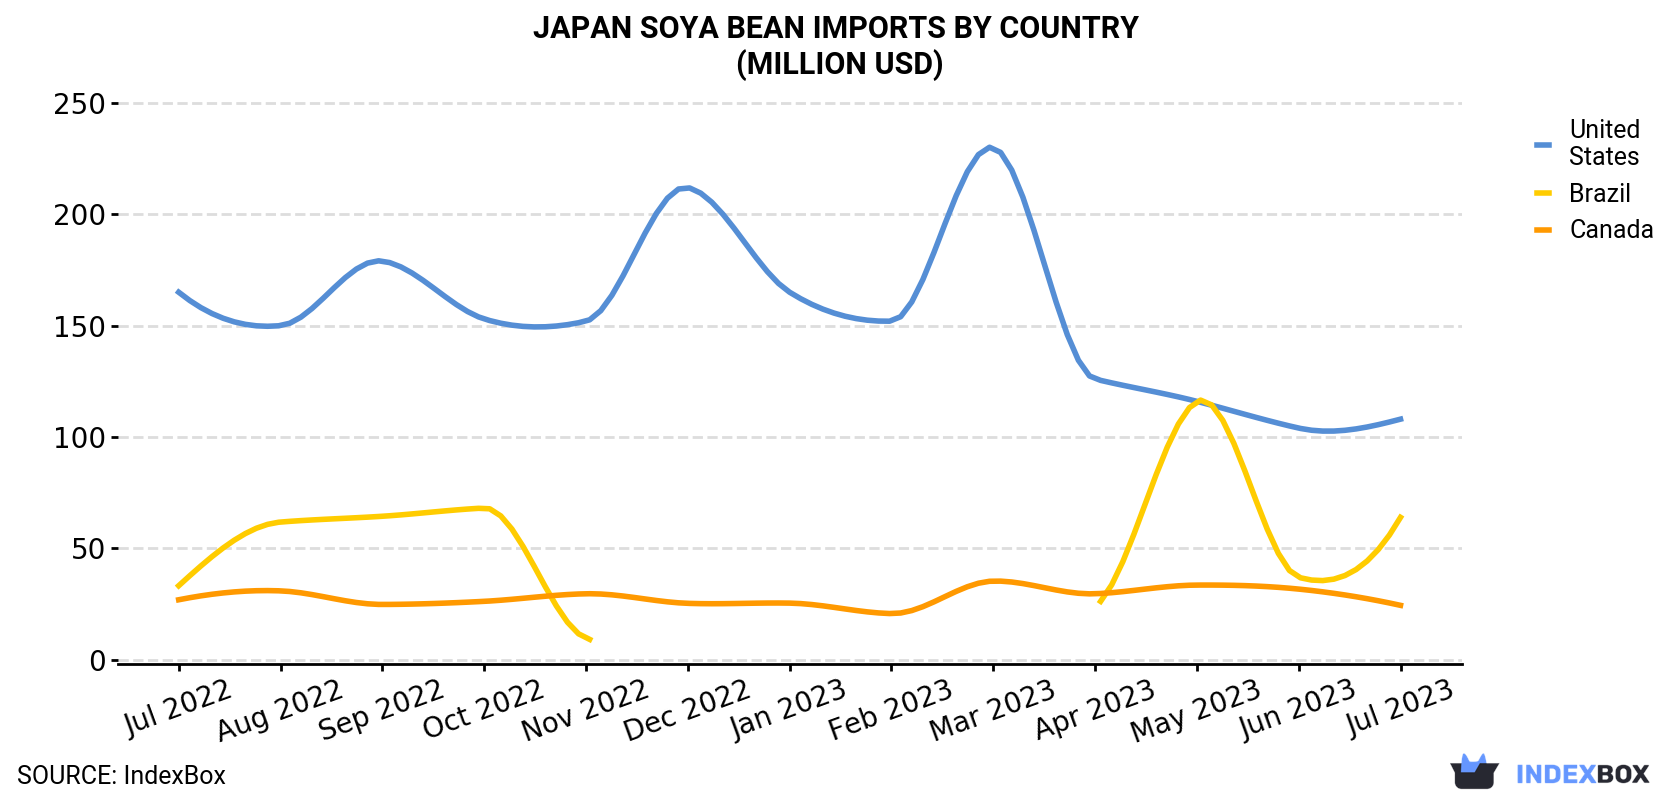 Japan Soya Bean Imports By Country (Million USD)